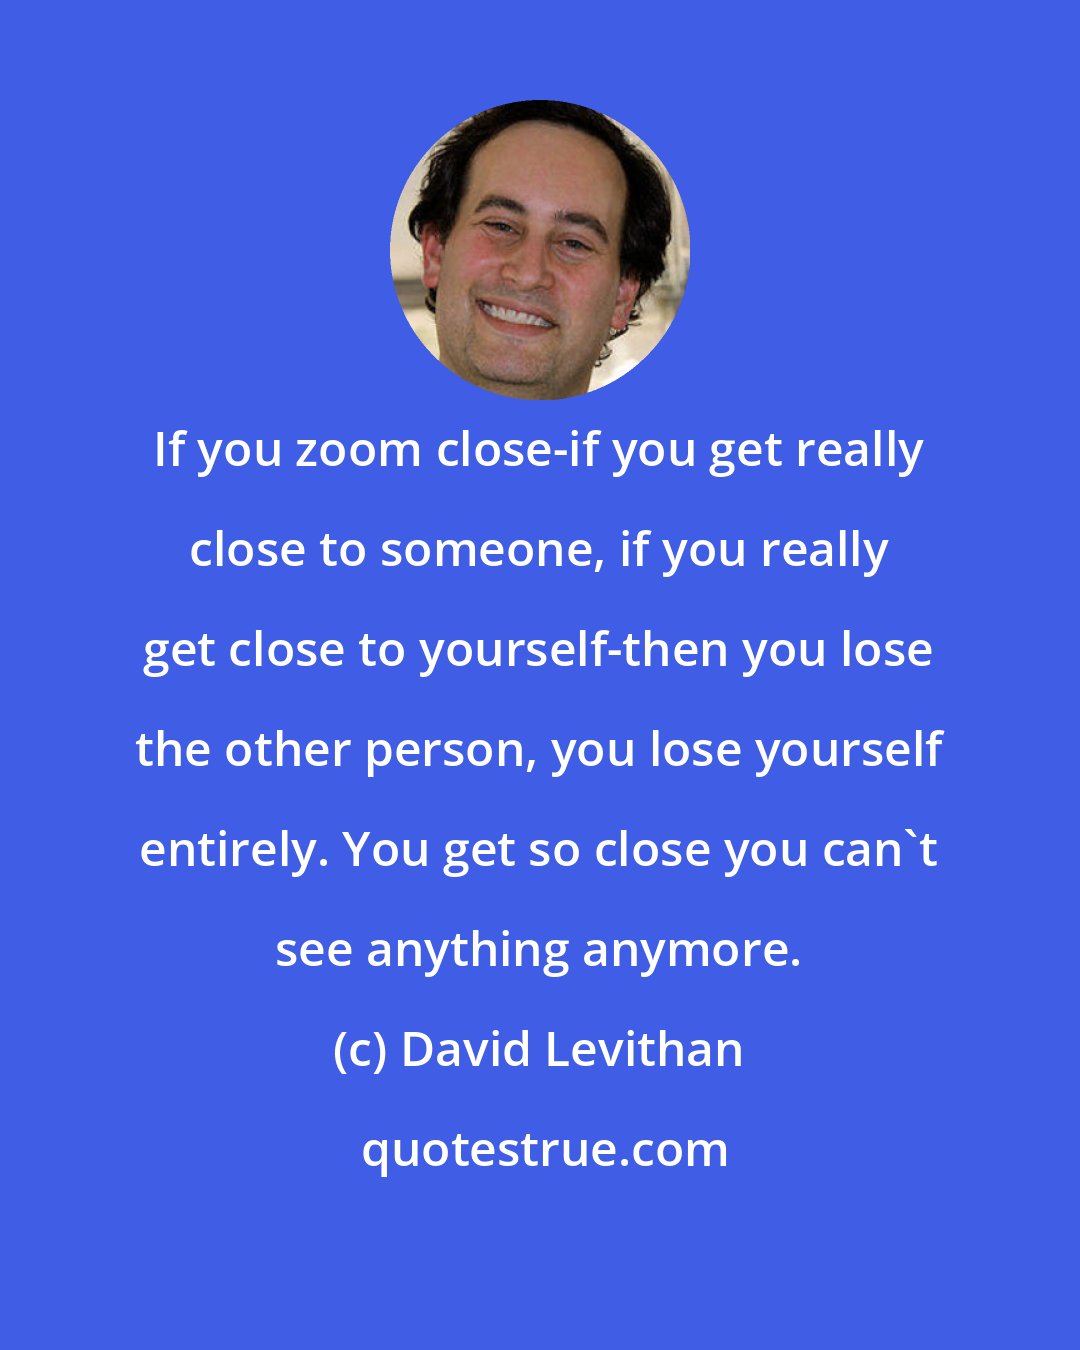 David Levithan: If you zoom close-if you get really close to someone, if you really get close to yourself-then you lose the other person, you lose yourself entirely. You get so close you can't see anything anymore.